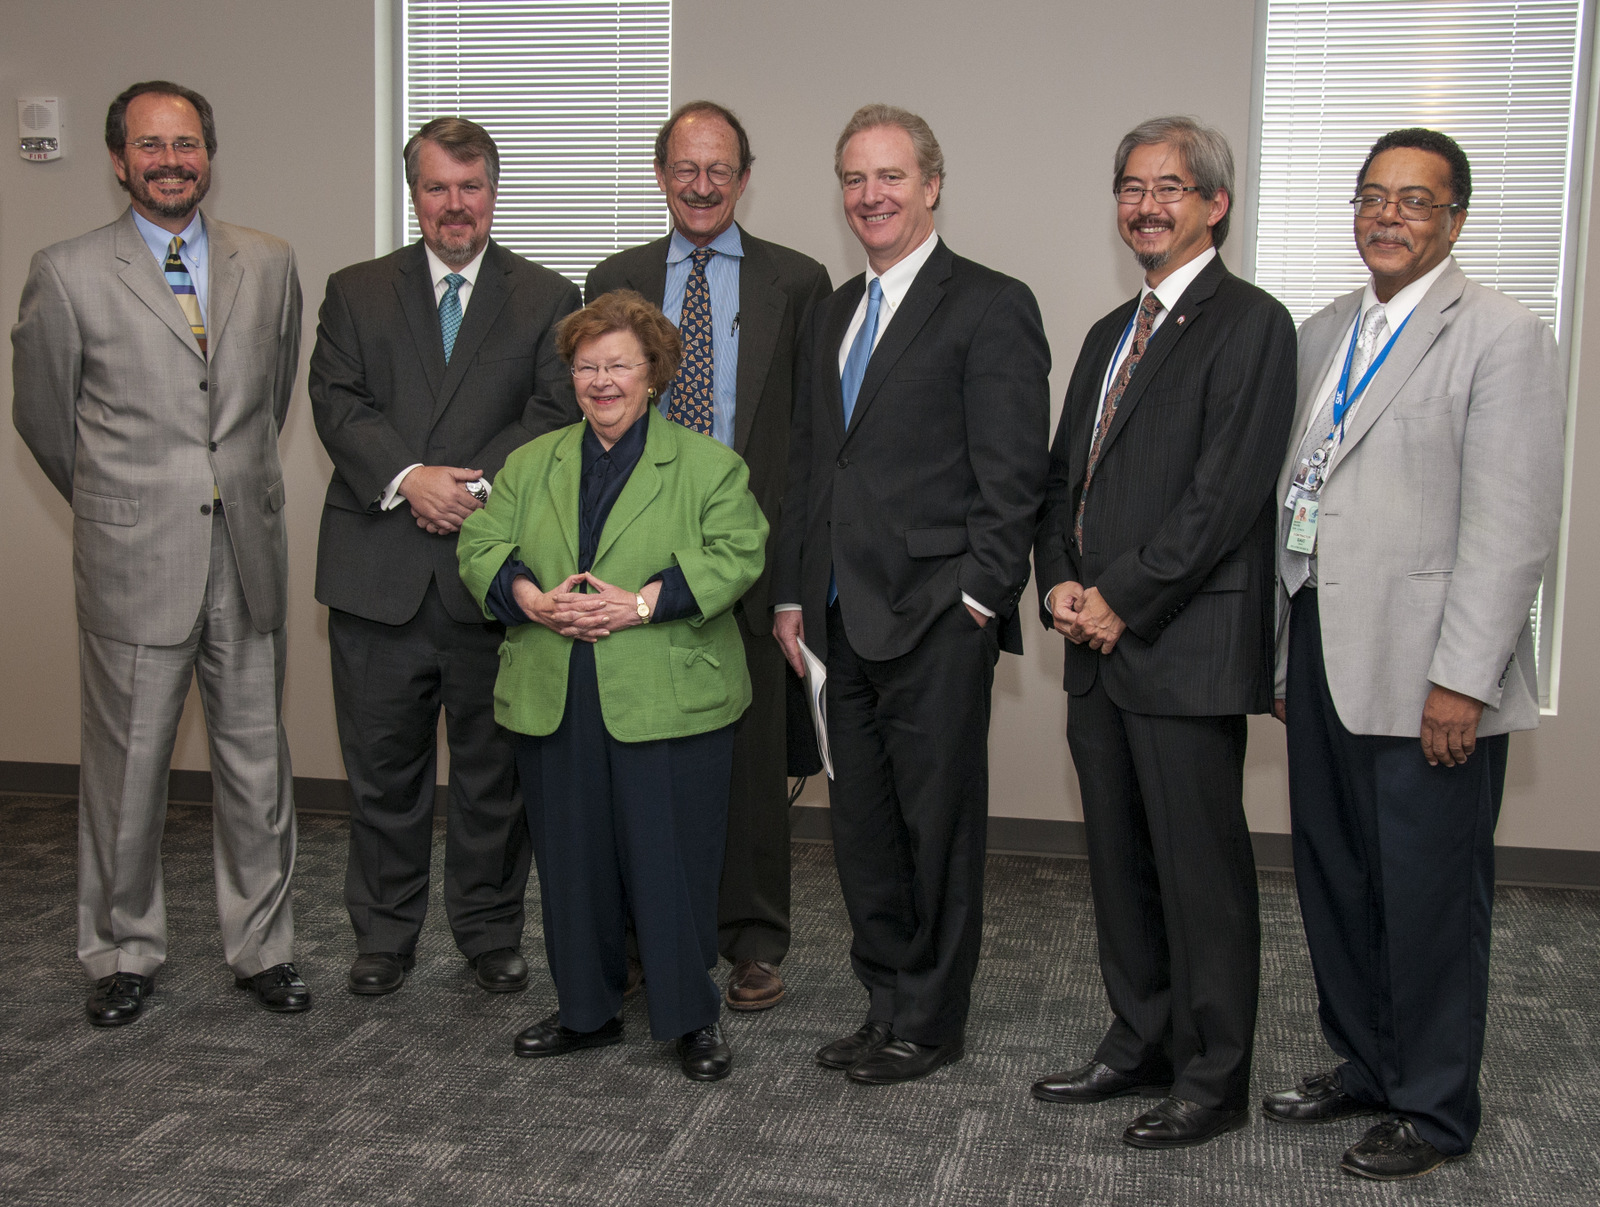 Mikulski, Van Hollen tour National Laboratory for Cancer Research in Frederick, MD.